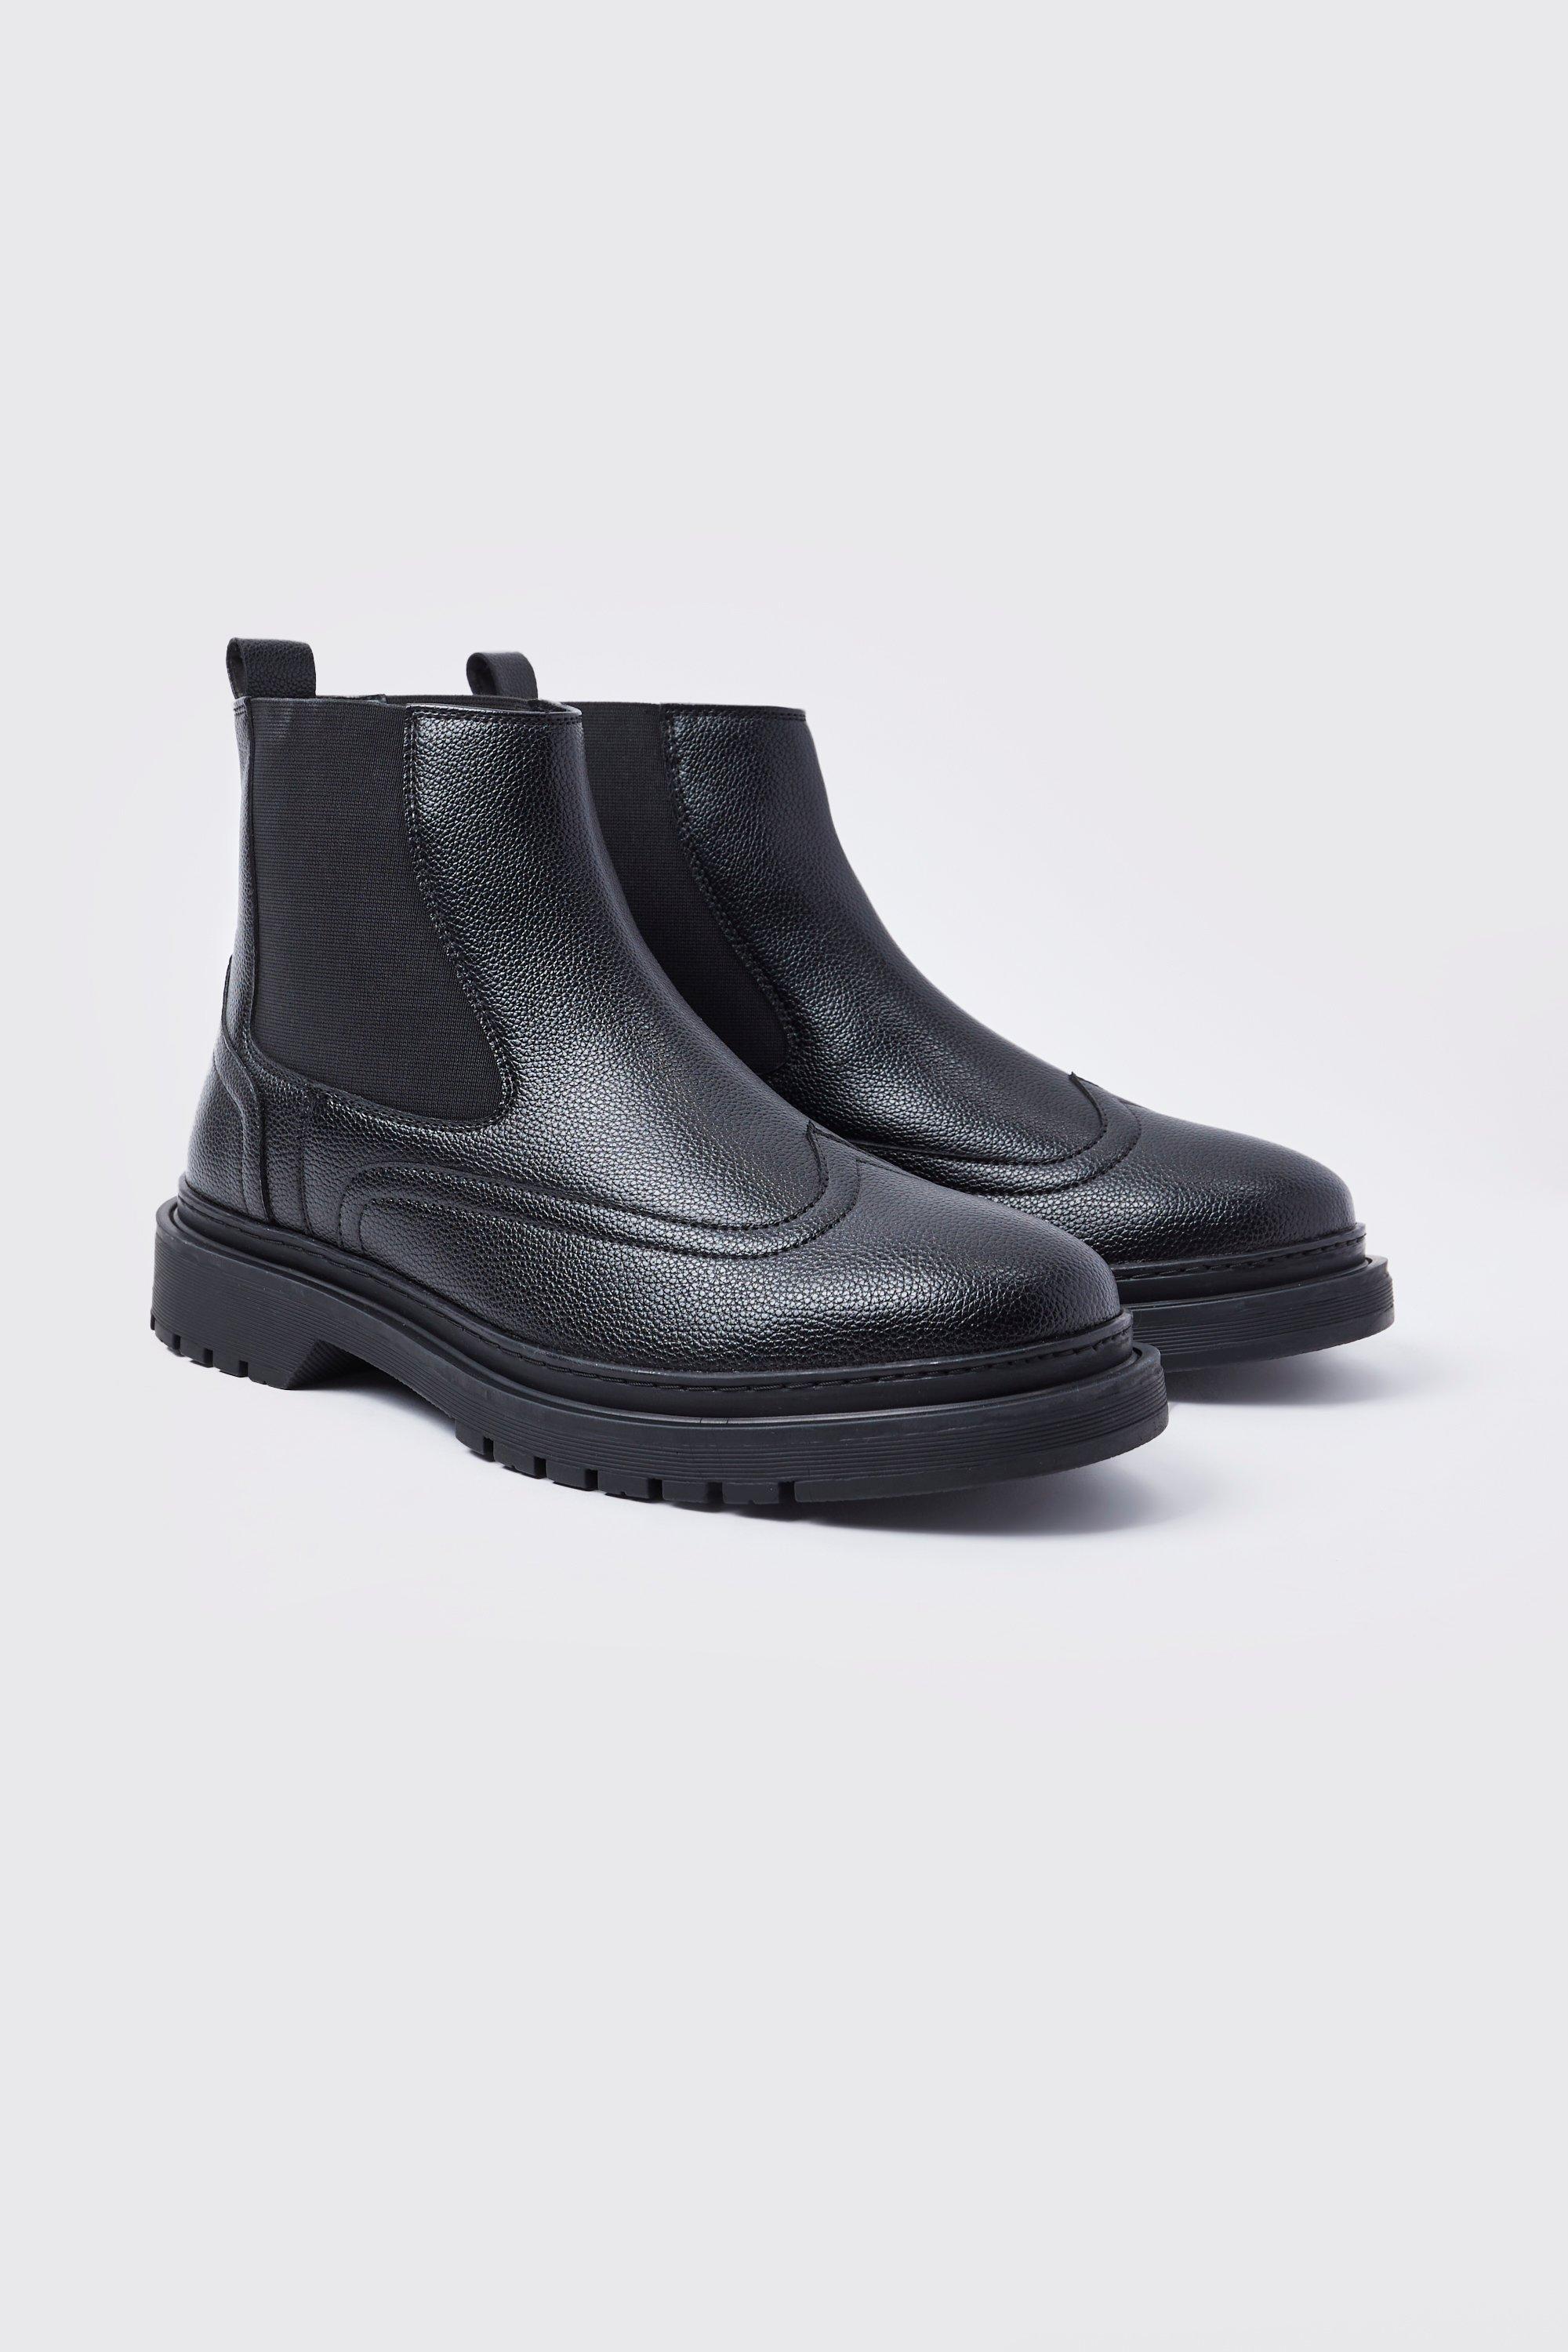 Mens Black Faux Leather Chelsea Boots With Track Sole, Black